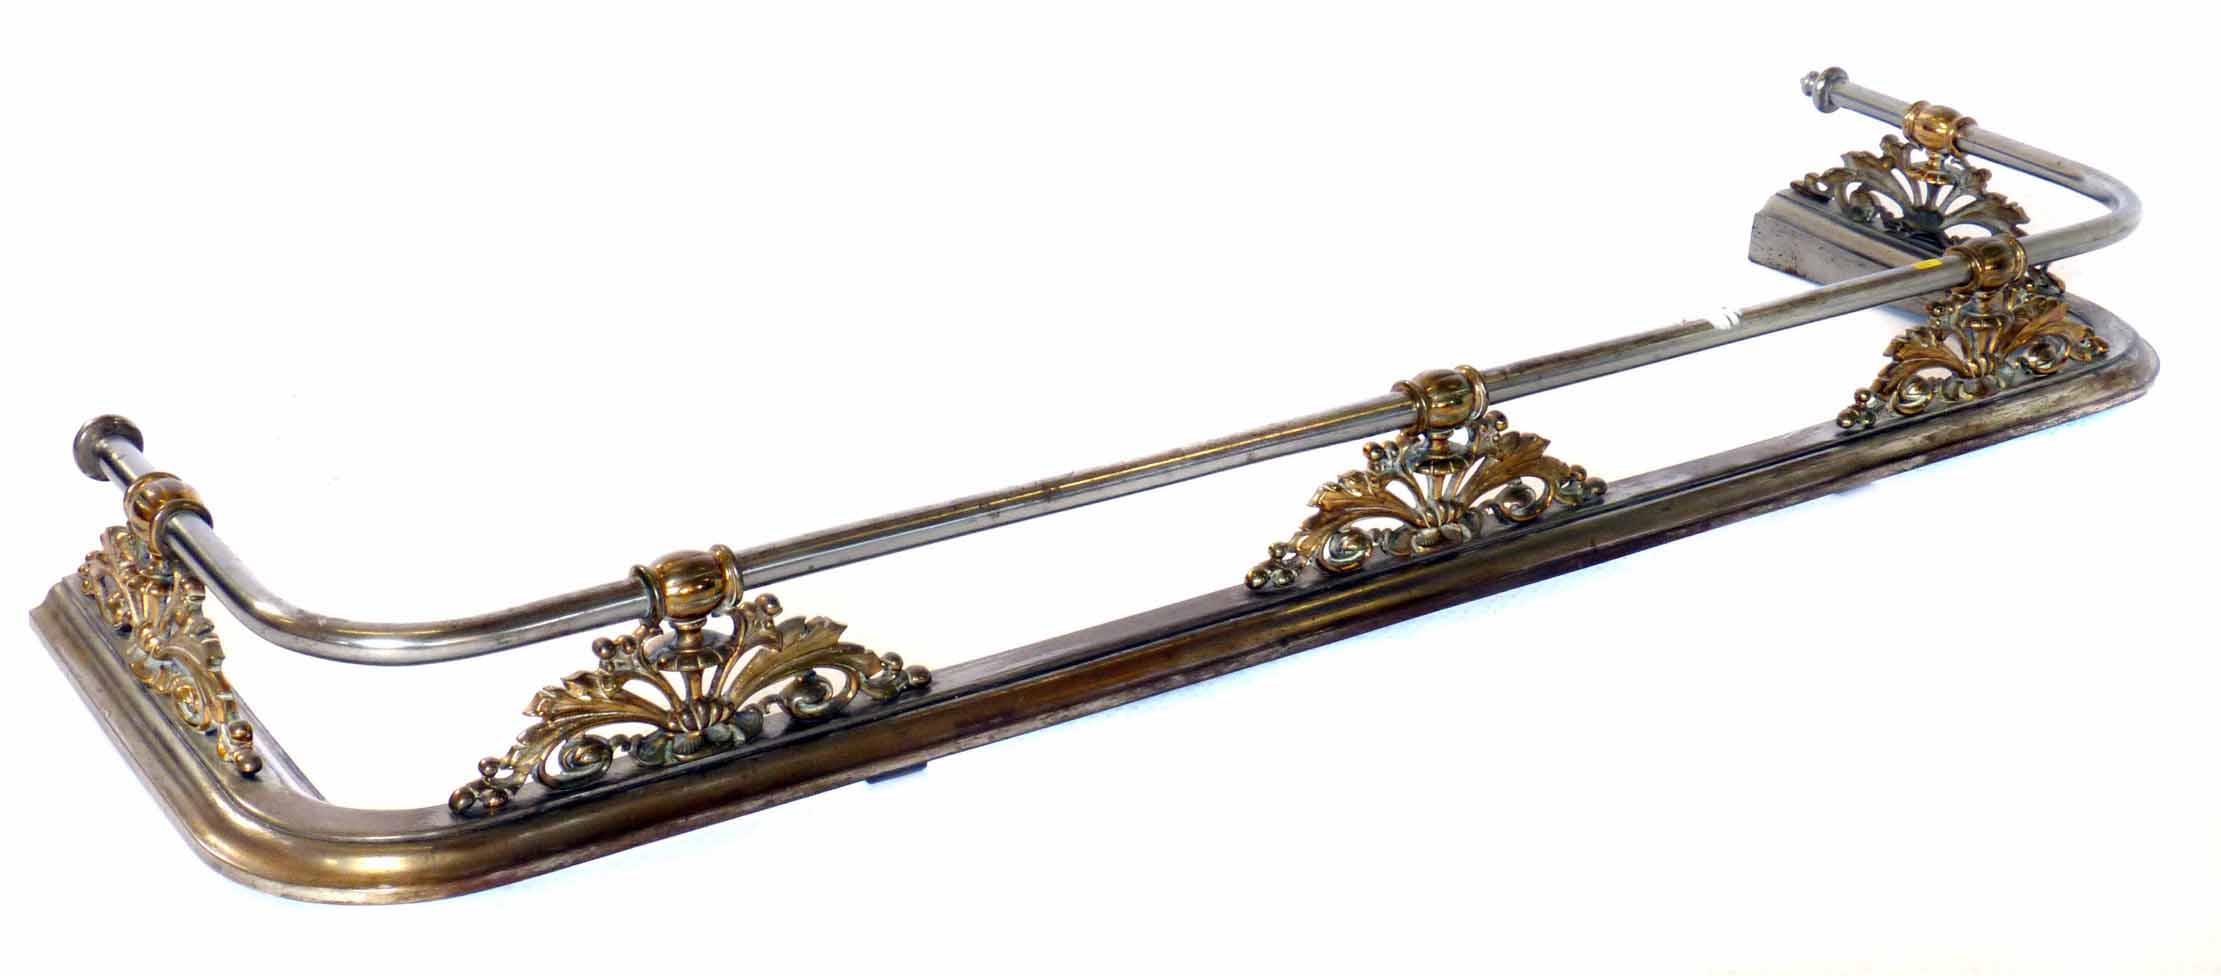 A Victorian brass and steel fire curb with foliate detail. 124 x 32 cm